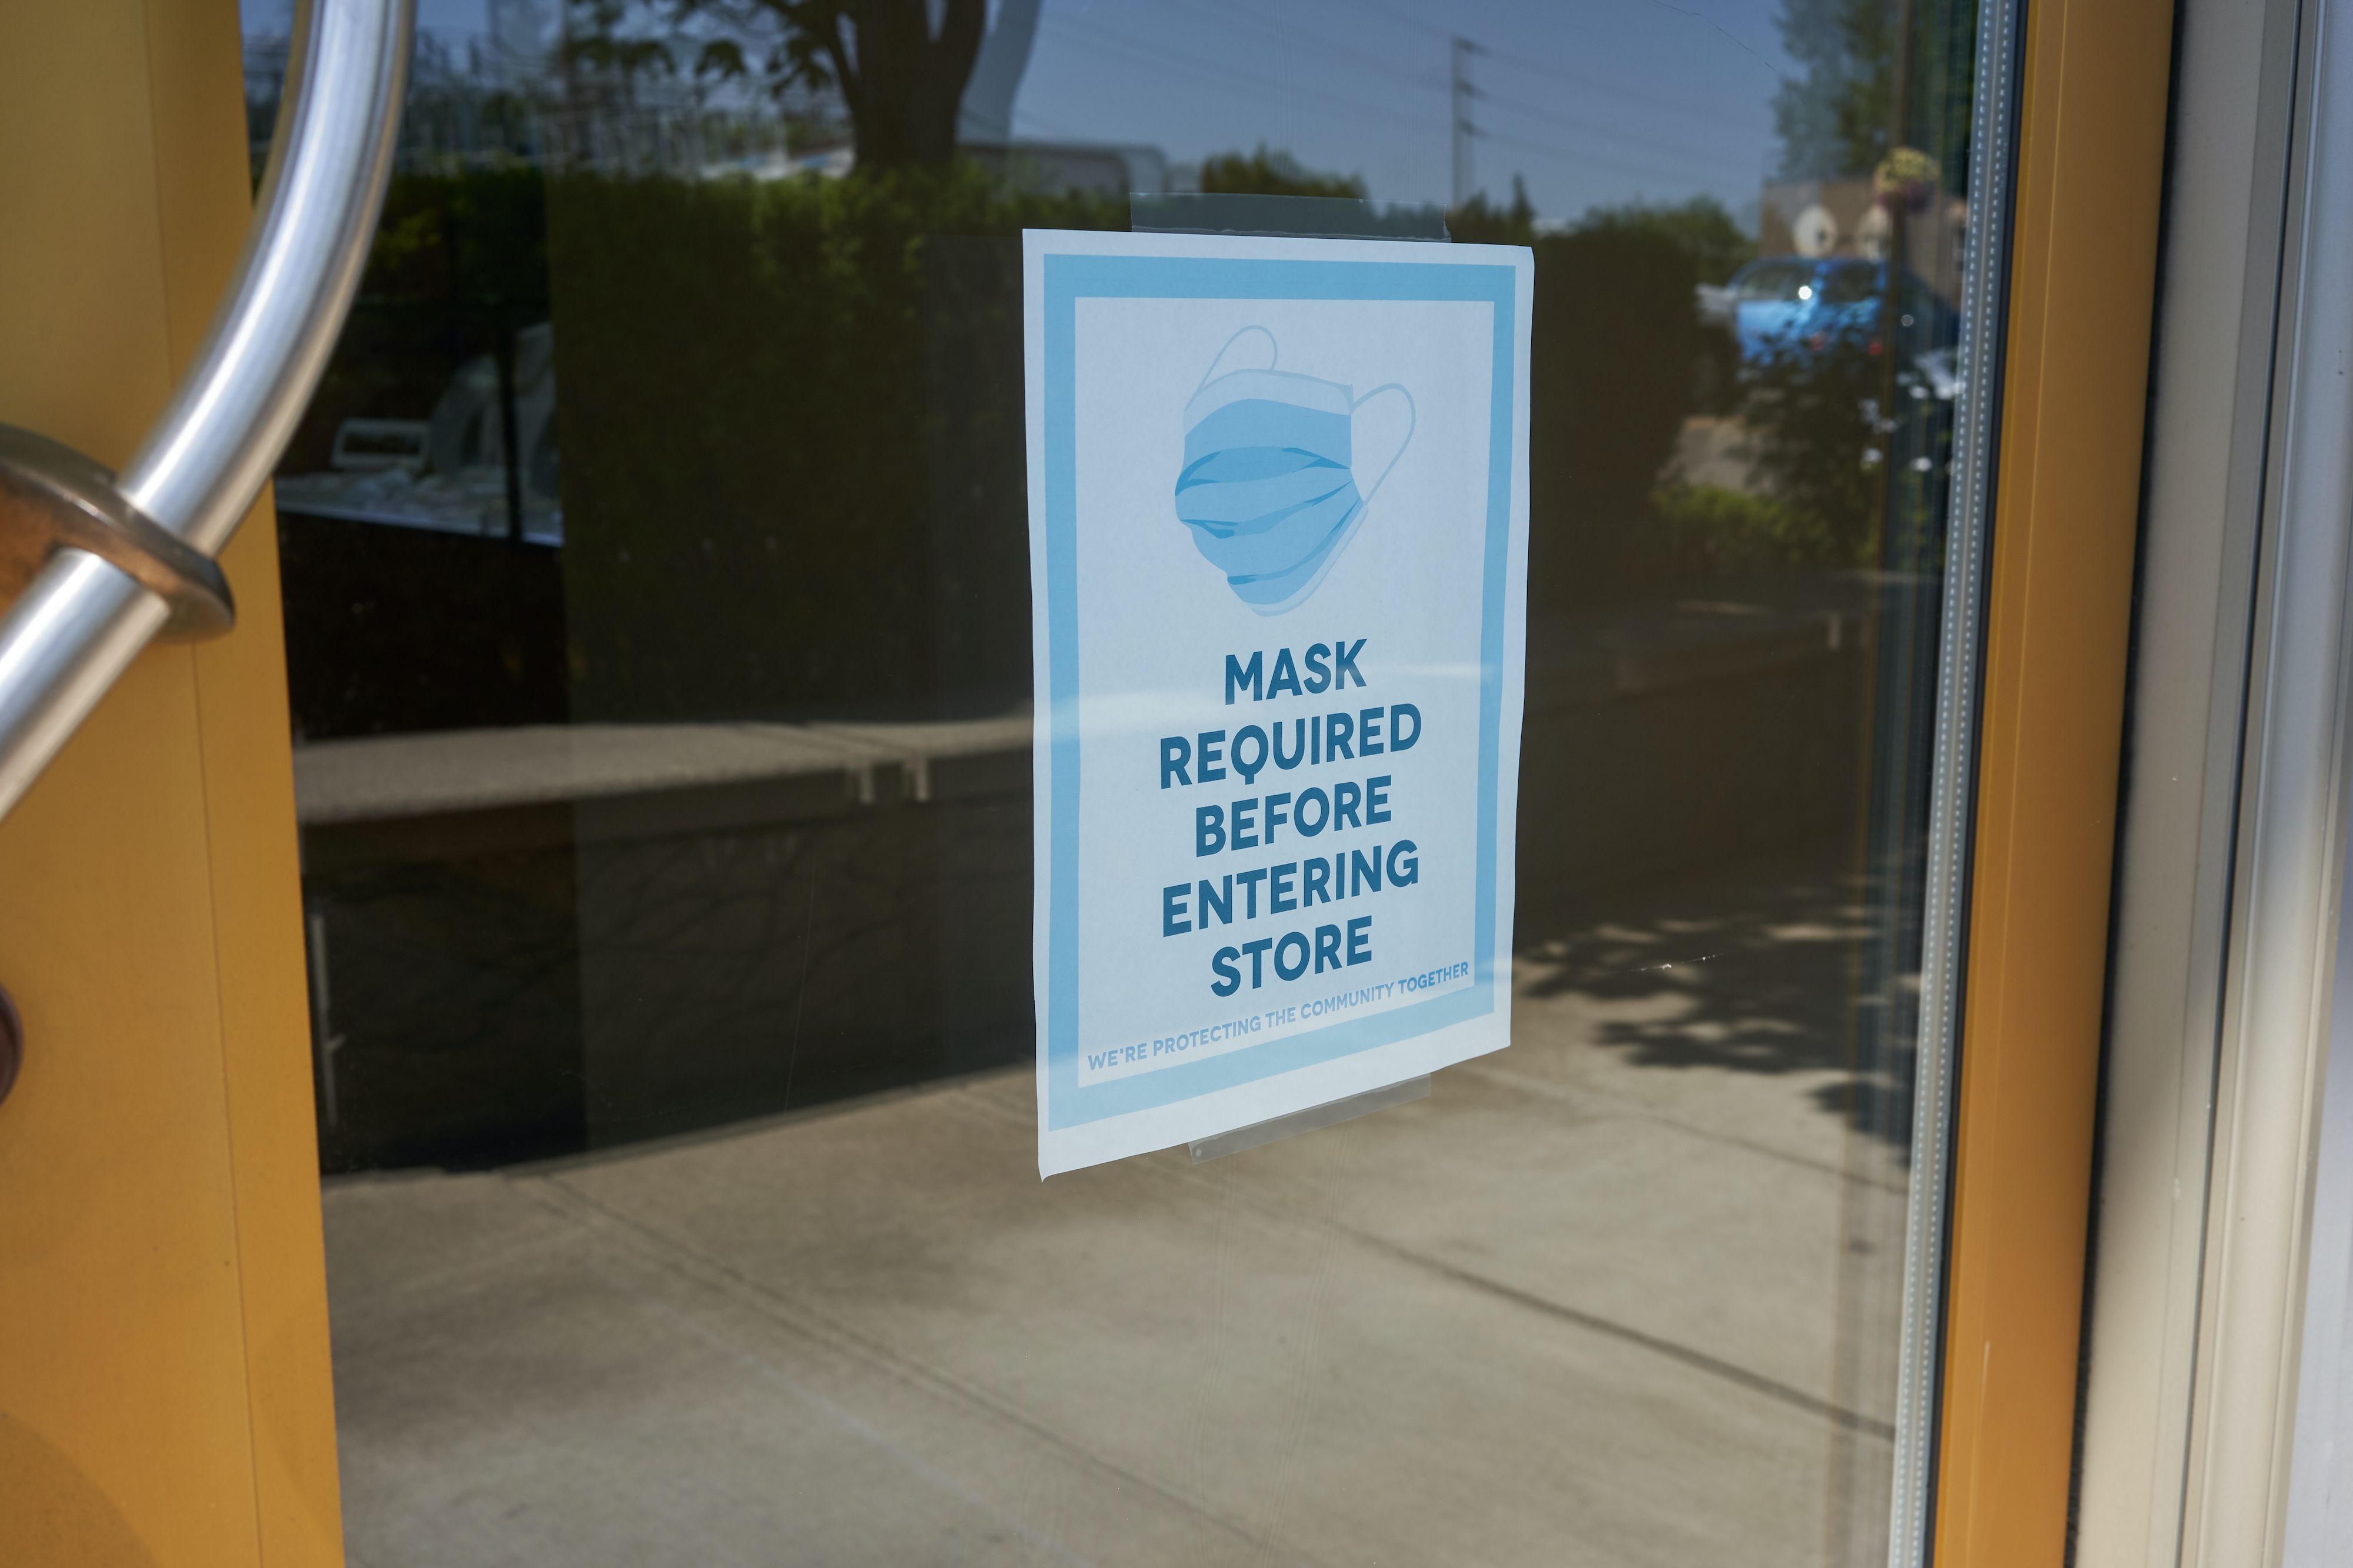 Mandatory mask policy signage at the entrance to a retail store in Oregon during the coronavirus pandemic. Image by Tada Images / Shutterstock. United States, 2020.